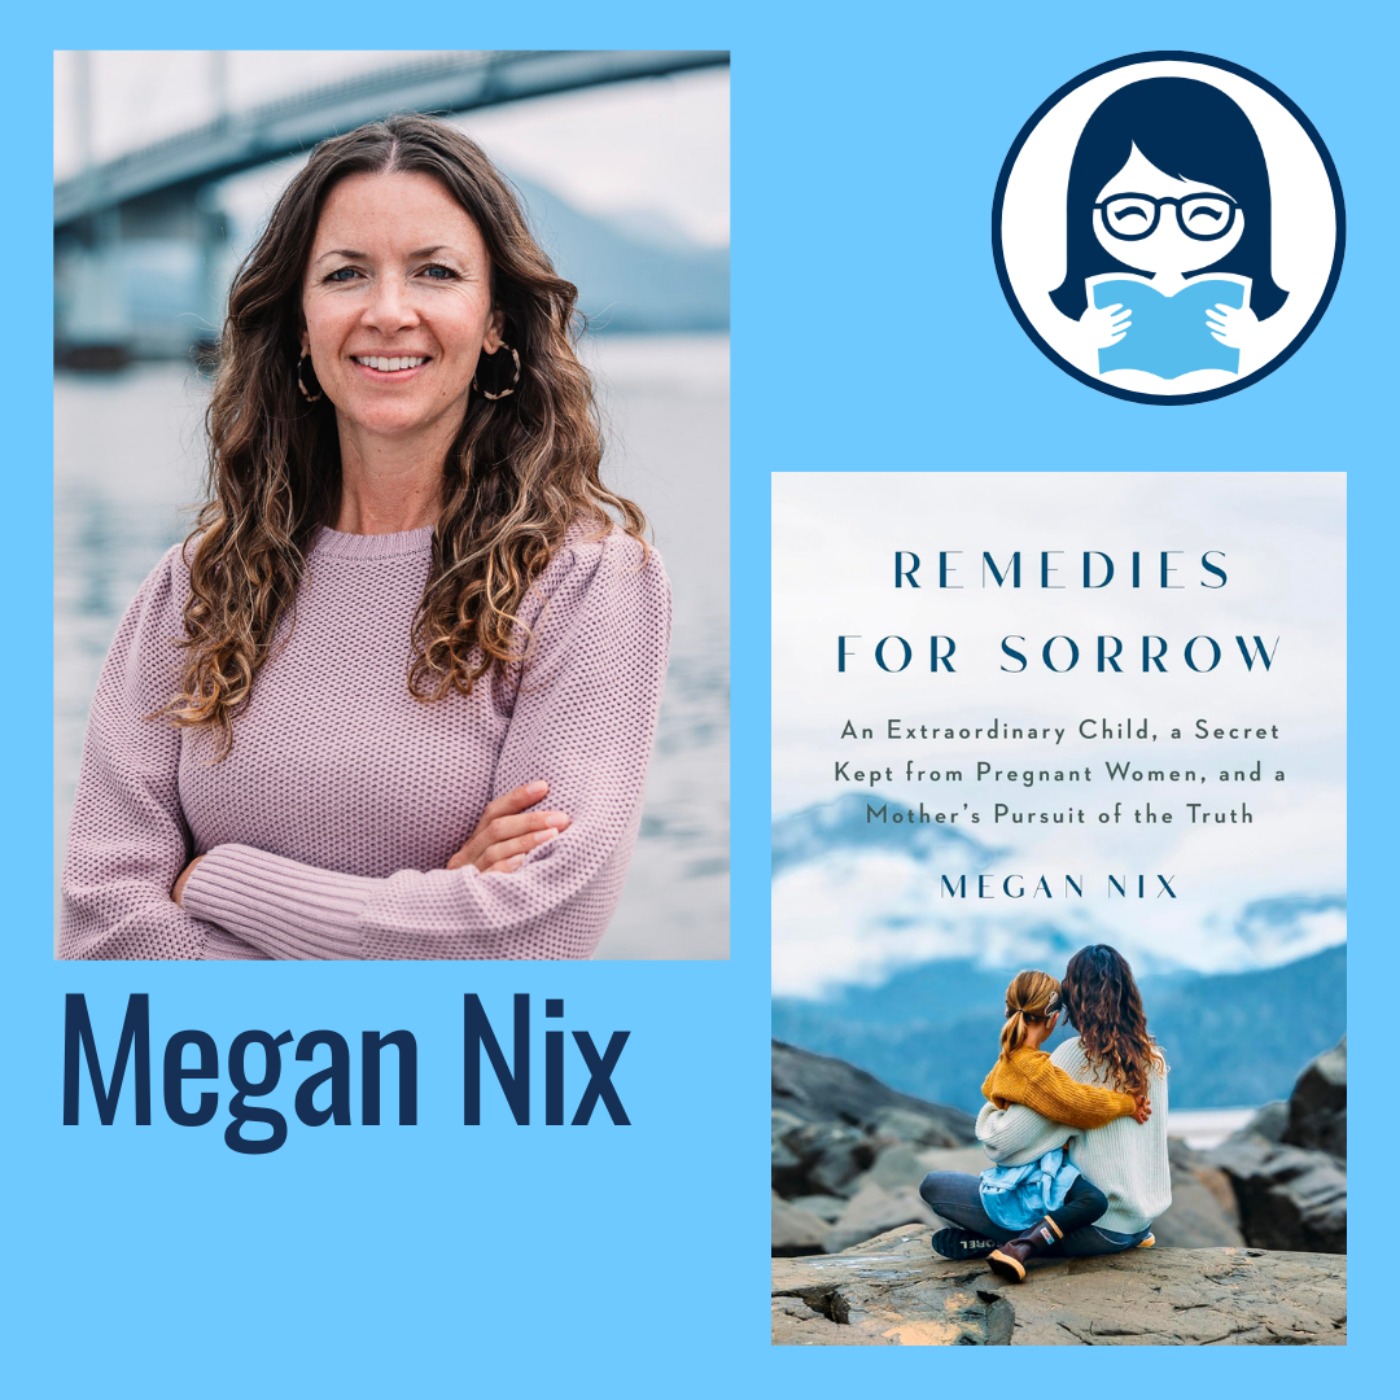 Megan Nix, REMEDIES FOR SORROW: An Extraordinary Child, a Secret Kept from Pregnant Women, and a Mother's Pursuit of the Truth